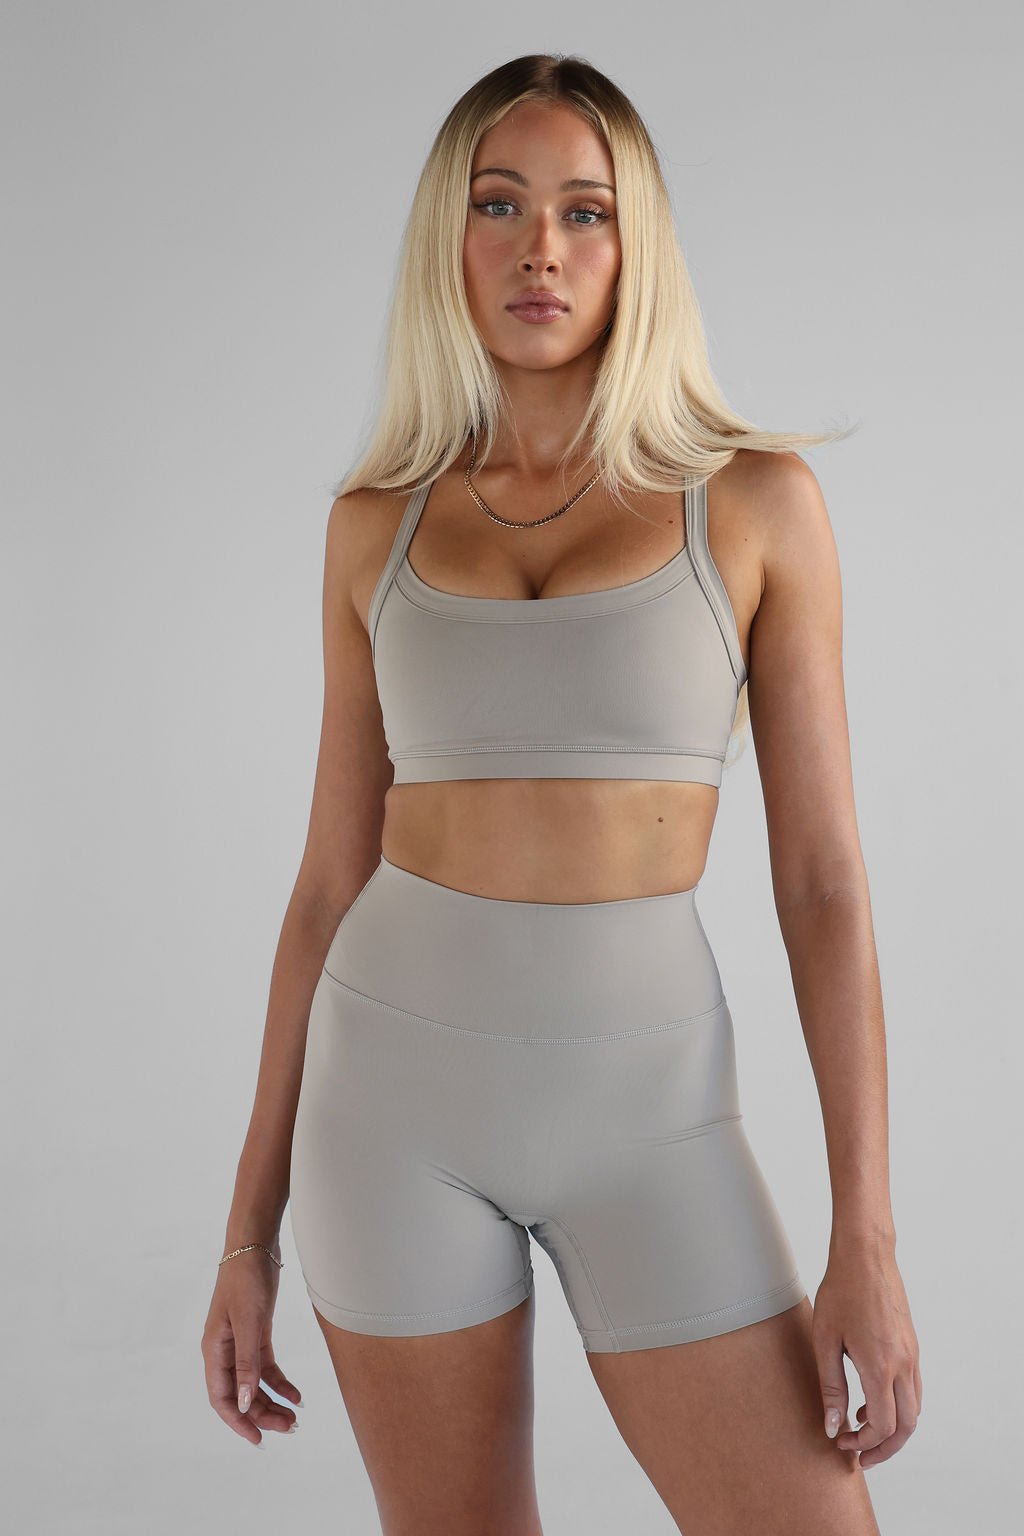 SCULPT Cross Back Crop - Latte SHIPPING FROM 12/02 - LEELO ACTIVE